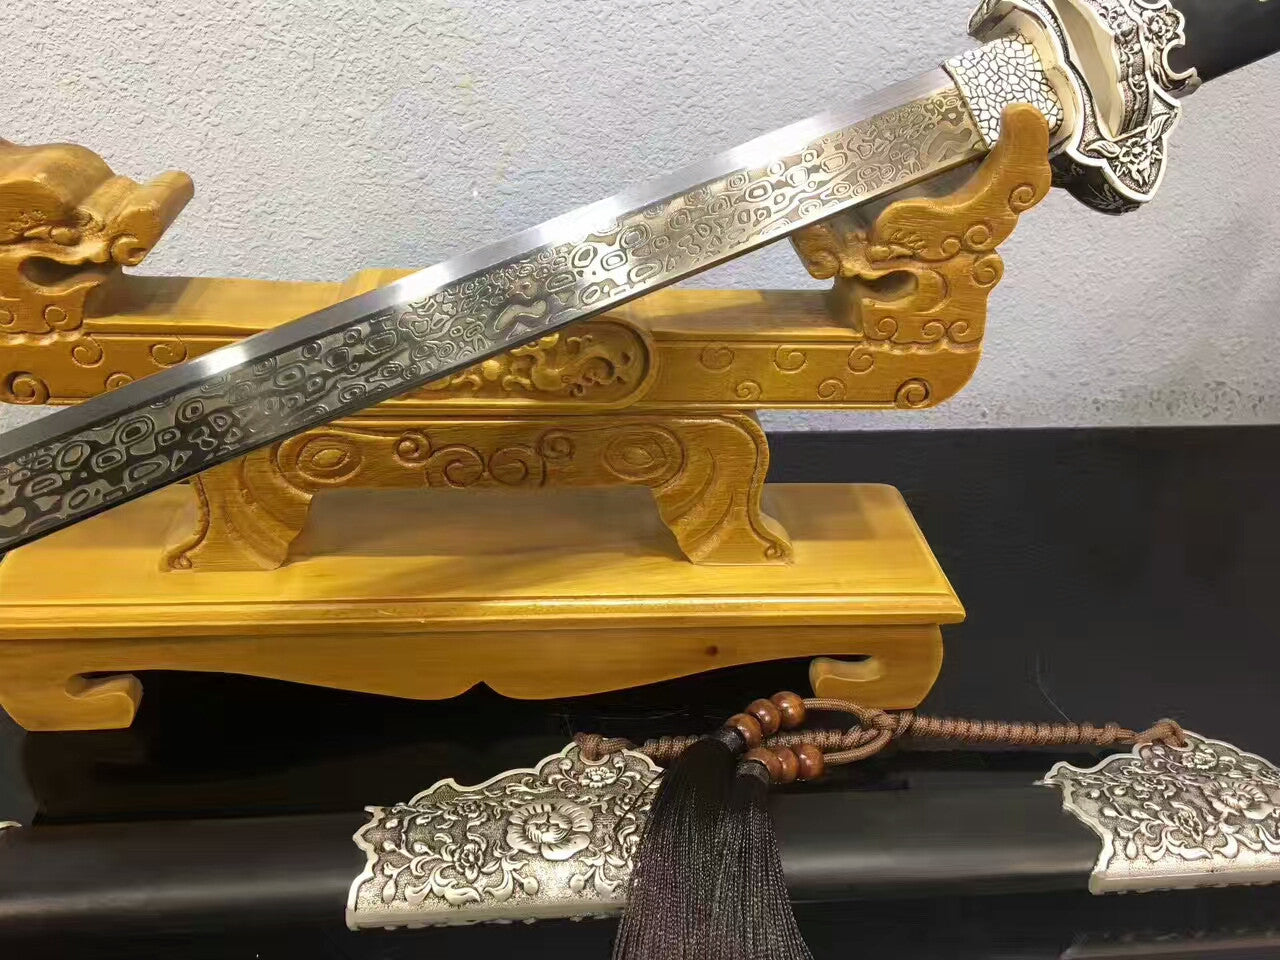 Tang sword,High carbon steel etching blade,Black scabbard,Alloy fittings - Chinese sword shop